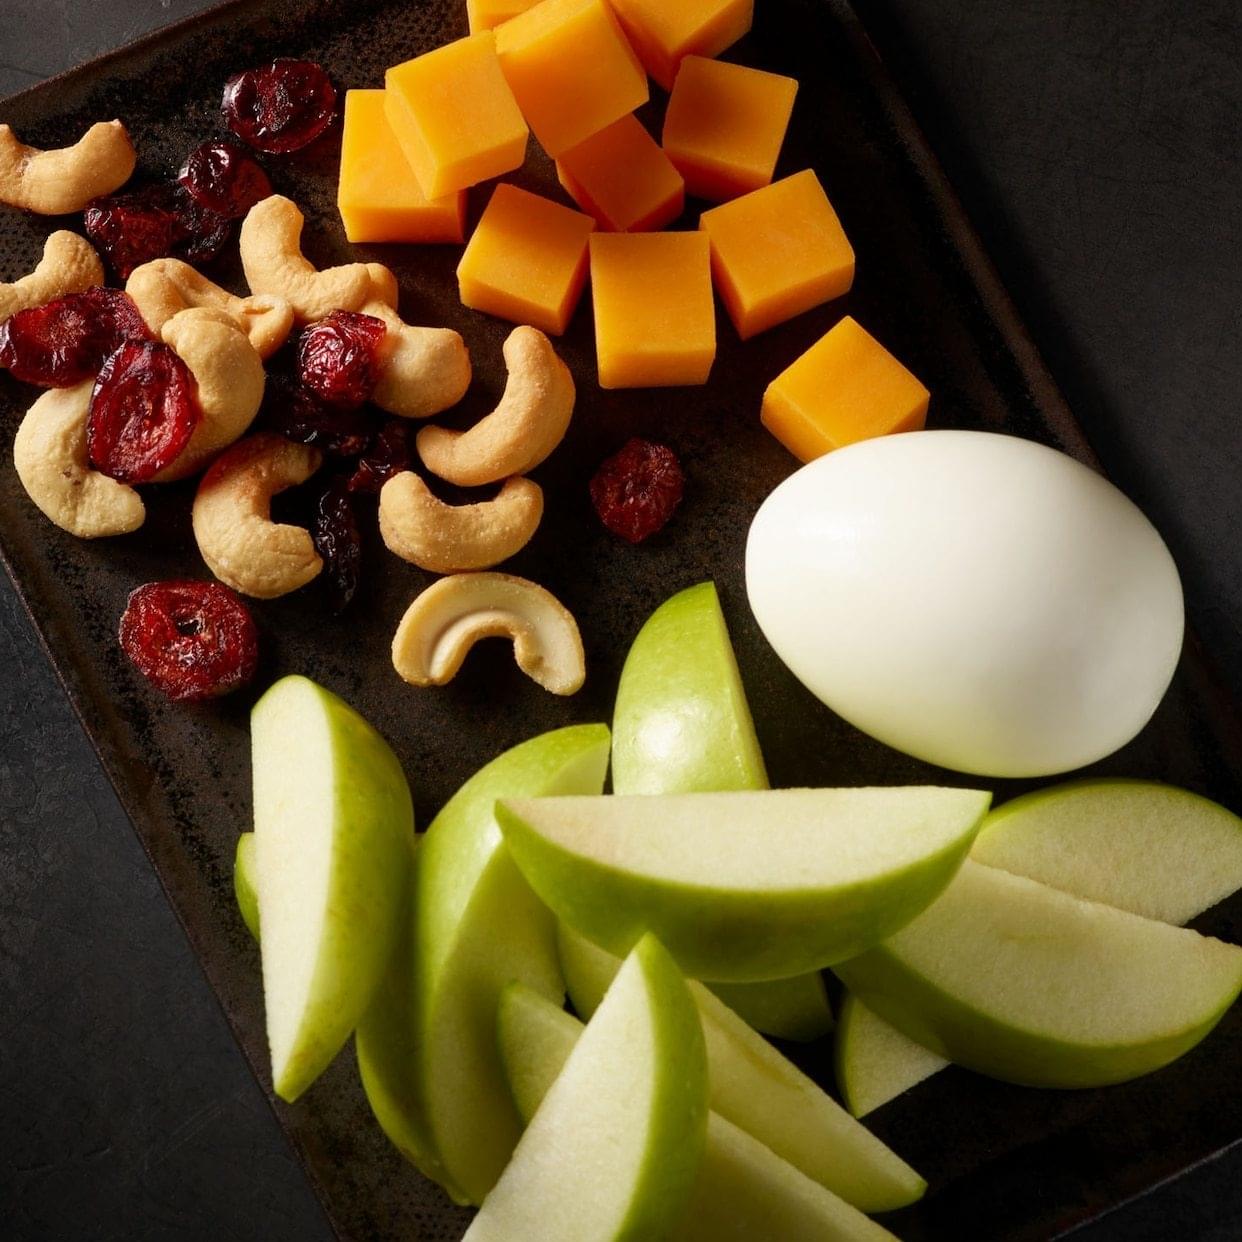 Starbucks Prosnax Green Apples, Egg, Mild Cheddar Cheese, and Cashews Snack Box Nutrition Facts